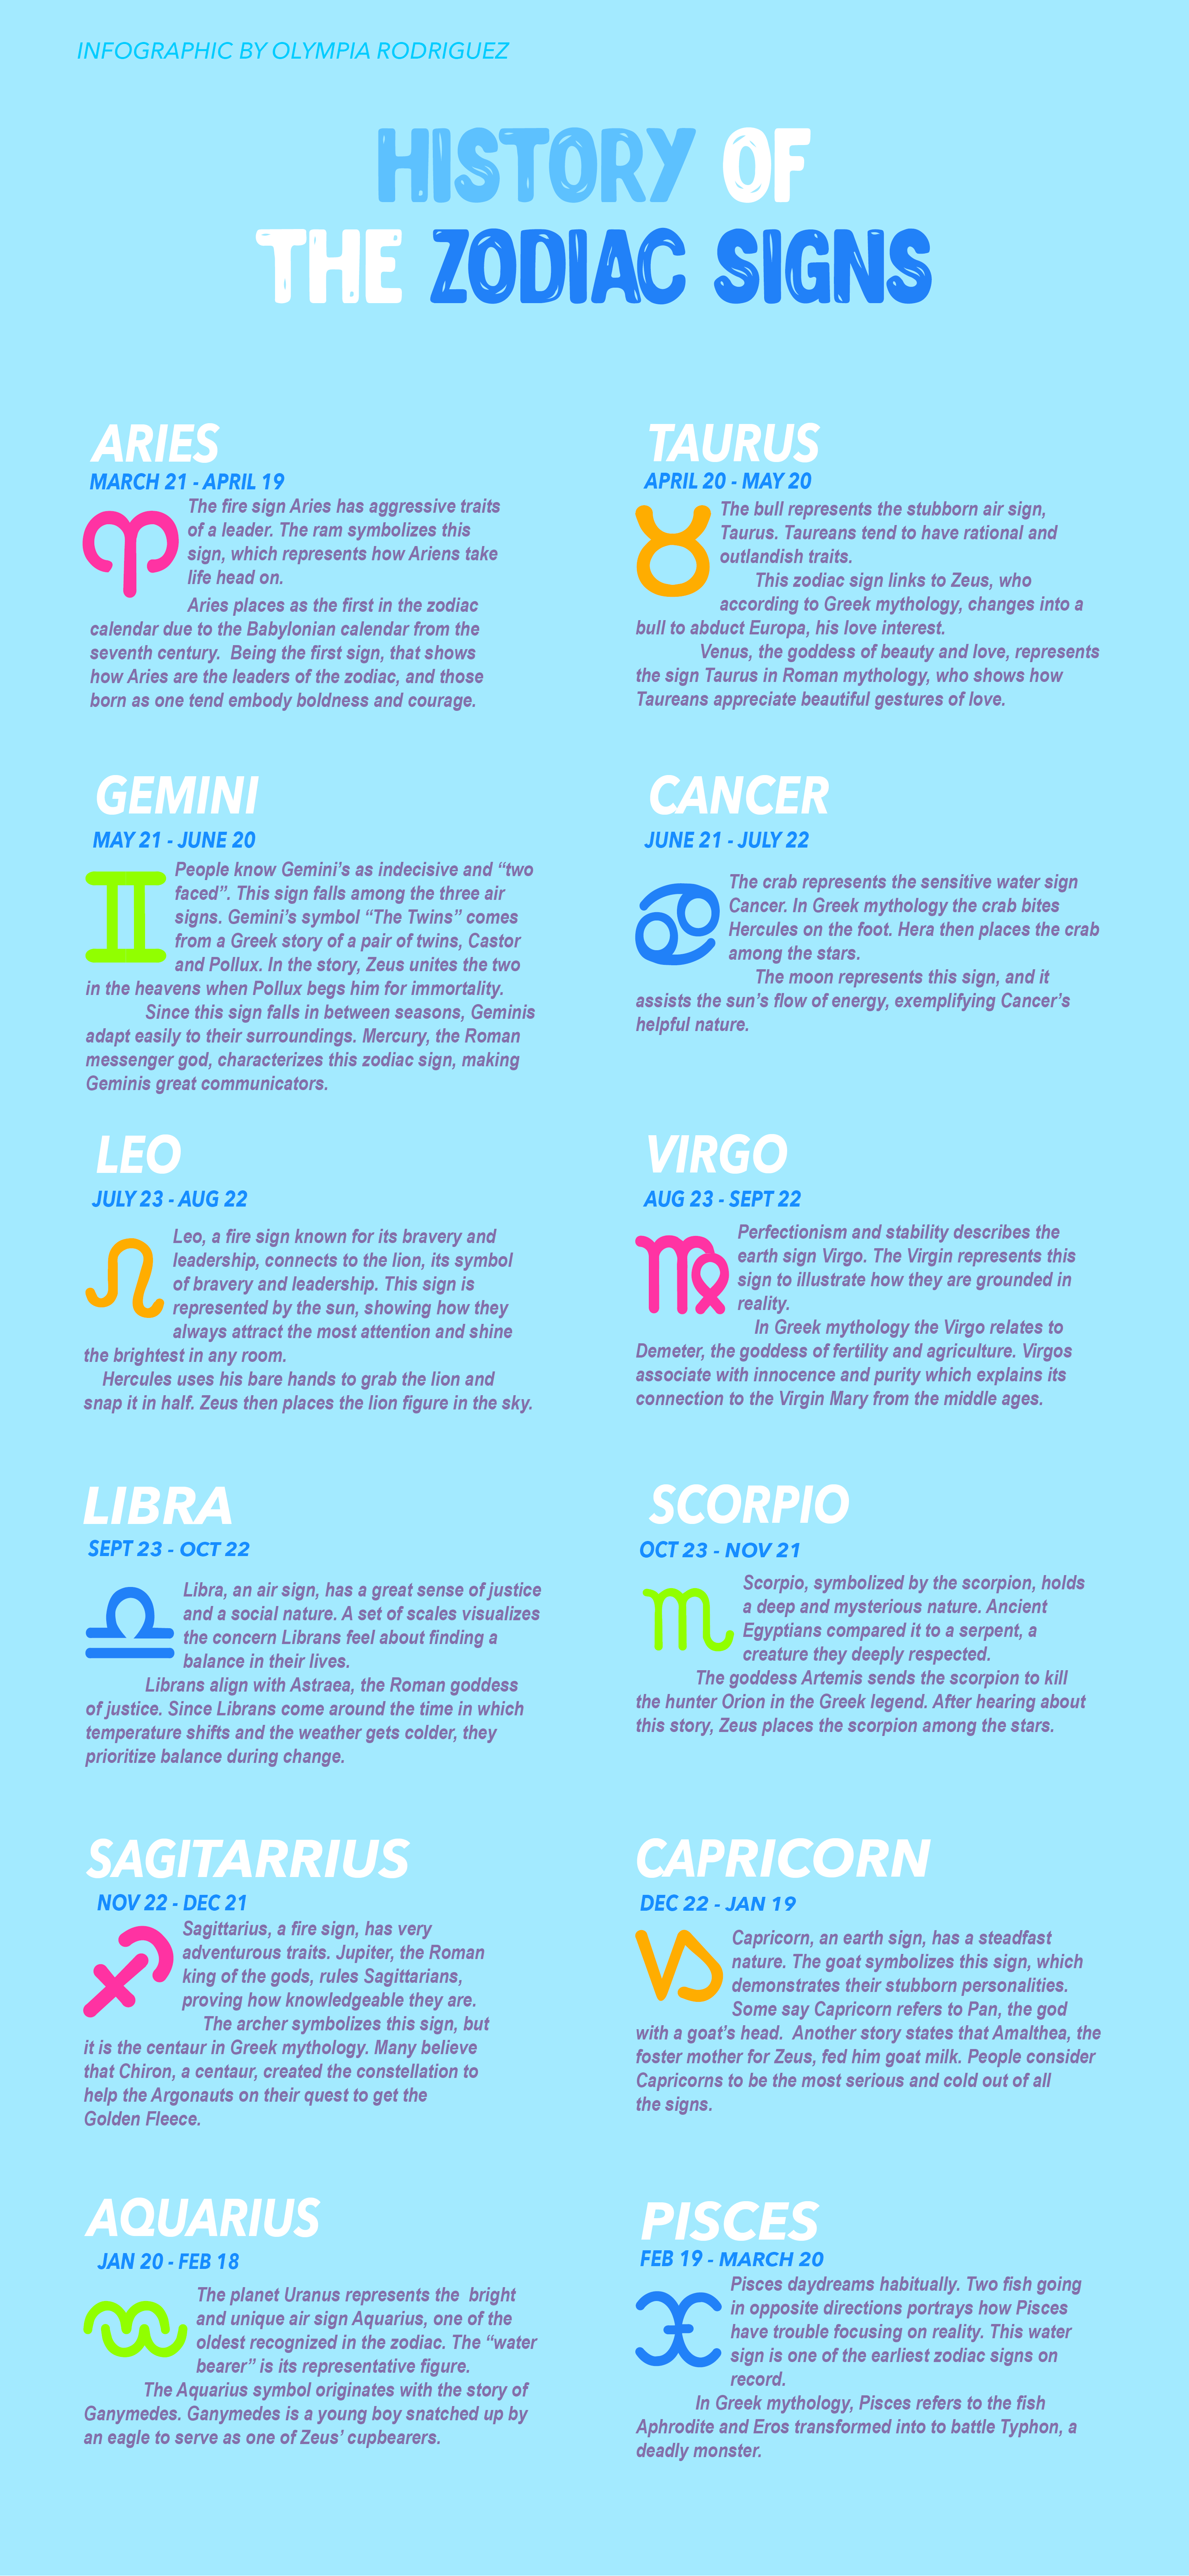 What Is The History Of Zodiac Signs?